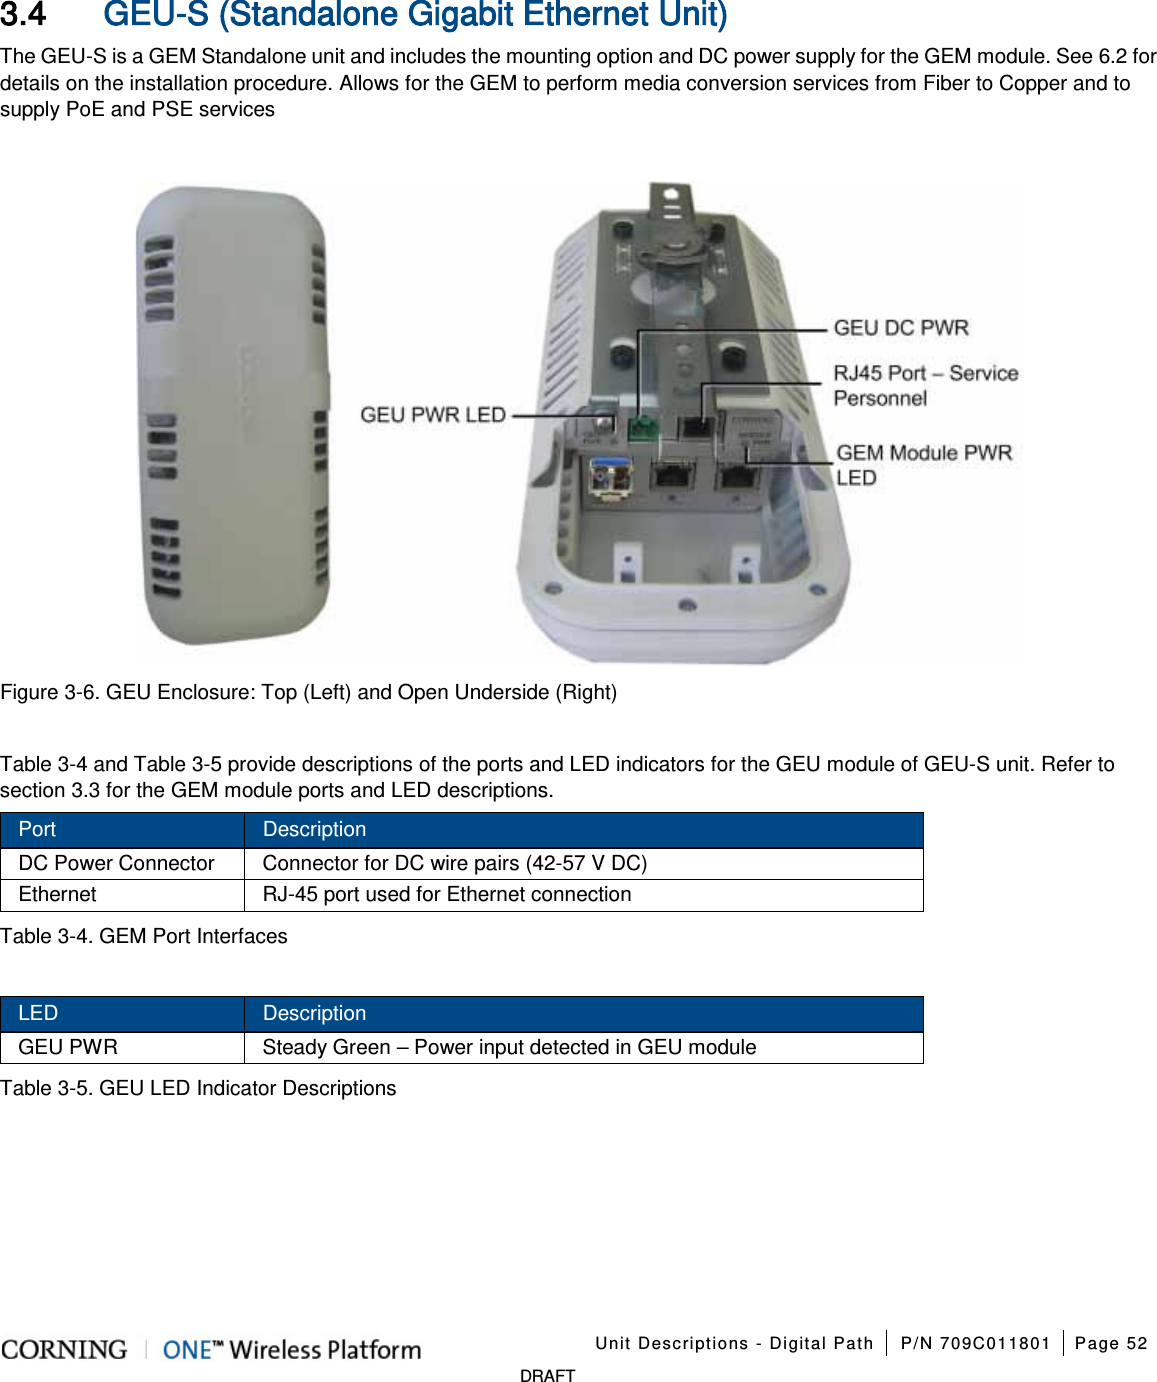    Unit Descriptions - Digital Path P/N 709C011801 Page 52   DRAFT  3.4 GEU-S (Standalone Gigabit Ethernet Unit) The GEU-S is a GEM Standalone unit and includes the mounting option and DC power supply for the GEM module. See  6.2 for details on the installation procedure. Allows for the GEM to perform media conversion services from Fiber to Copper and to supply PoE and PSE services   Figure  3-6. GEU Enclosure: Top (Left) and Open Underside (Right)  Table  3-4 and Table  3-5 provide descriptions of the ports and LED indicators for the GEU module of GEU-S unit. Refer to section  3.3 for the GEM module ports and LED descriptions. Port Description DC Power Connector Connector for DC wire pairs (42-57 V DC) Ethernet RJ-45 port used for Ethernet connection   Table  3-4. GEM Port Interfaces  LED Description GEU PWR Steady Green – Power input detected in GEU module Table  3-5. GEU LED Indicator Descriptions   